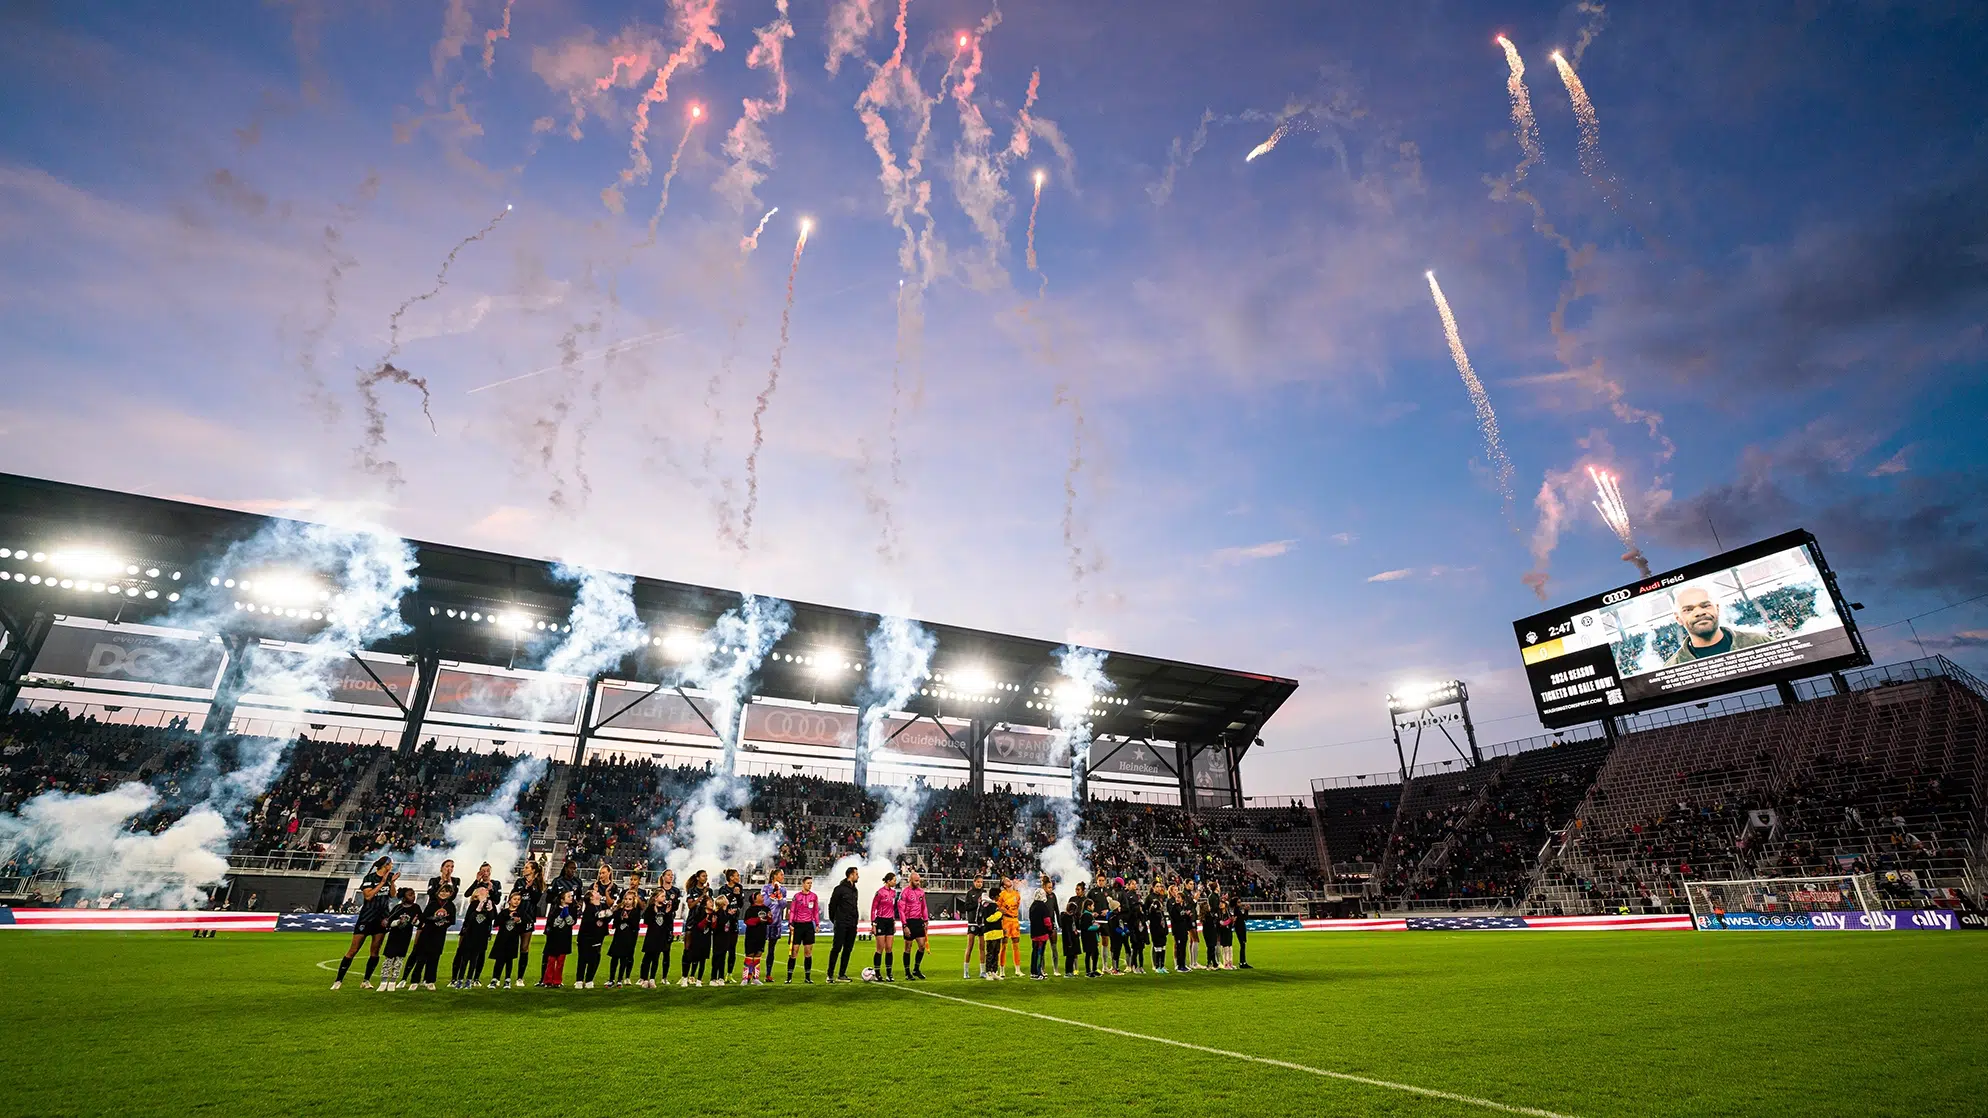 Soccer players stand at midfield of Audi Field while fire works are launched into the air.